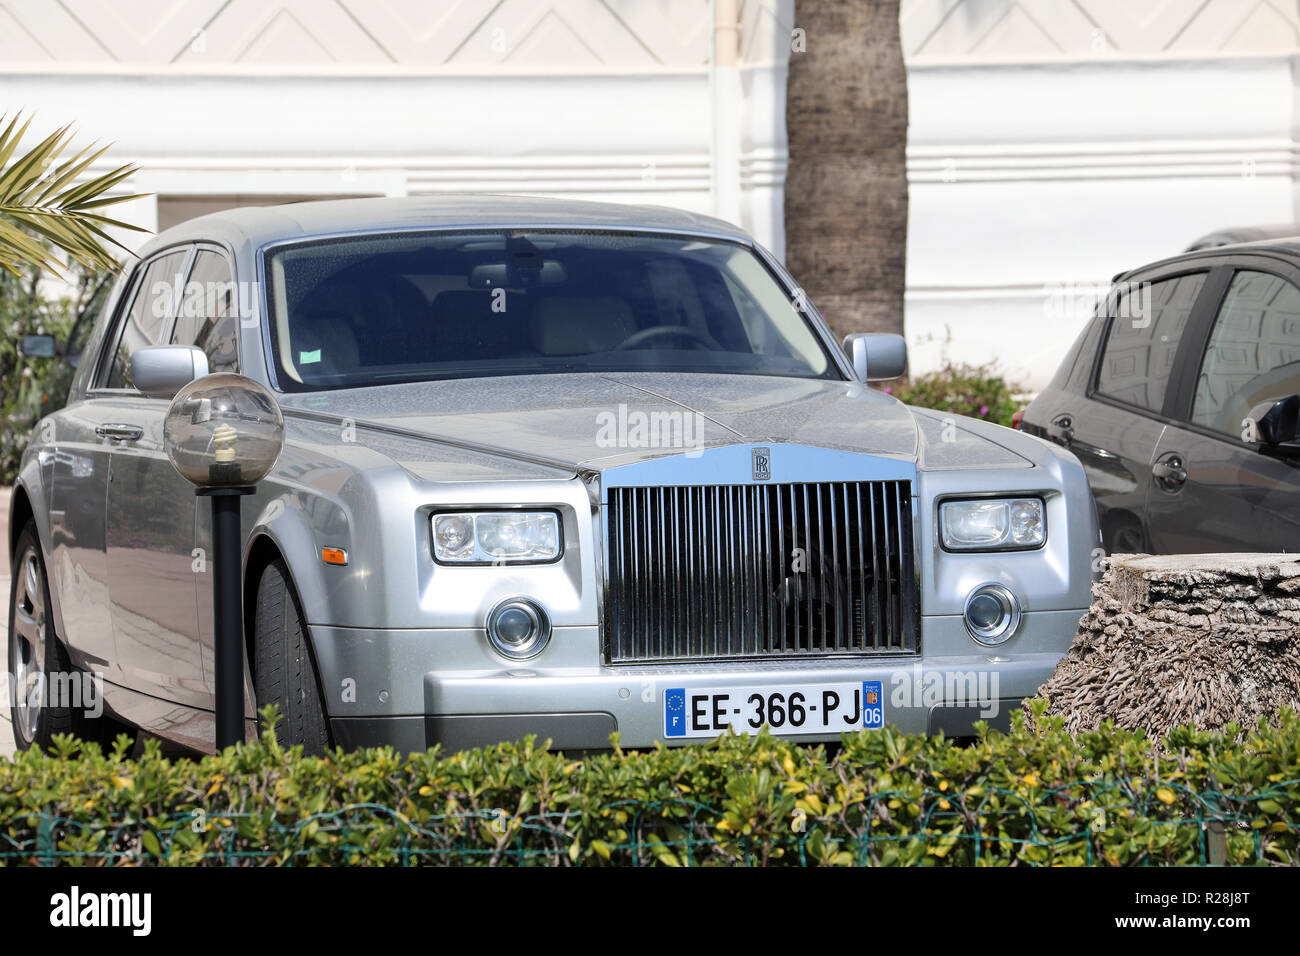 Menton, France - April 5, 2018: Luxury Rolls-Royce Phantom (Front View) Parked In The Street of Menton, French Riviera, Europe Stock Photo